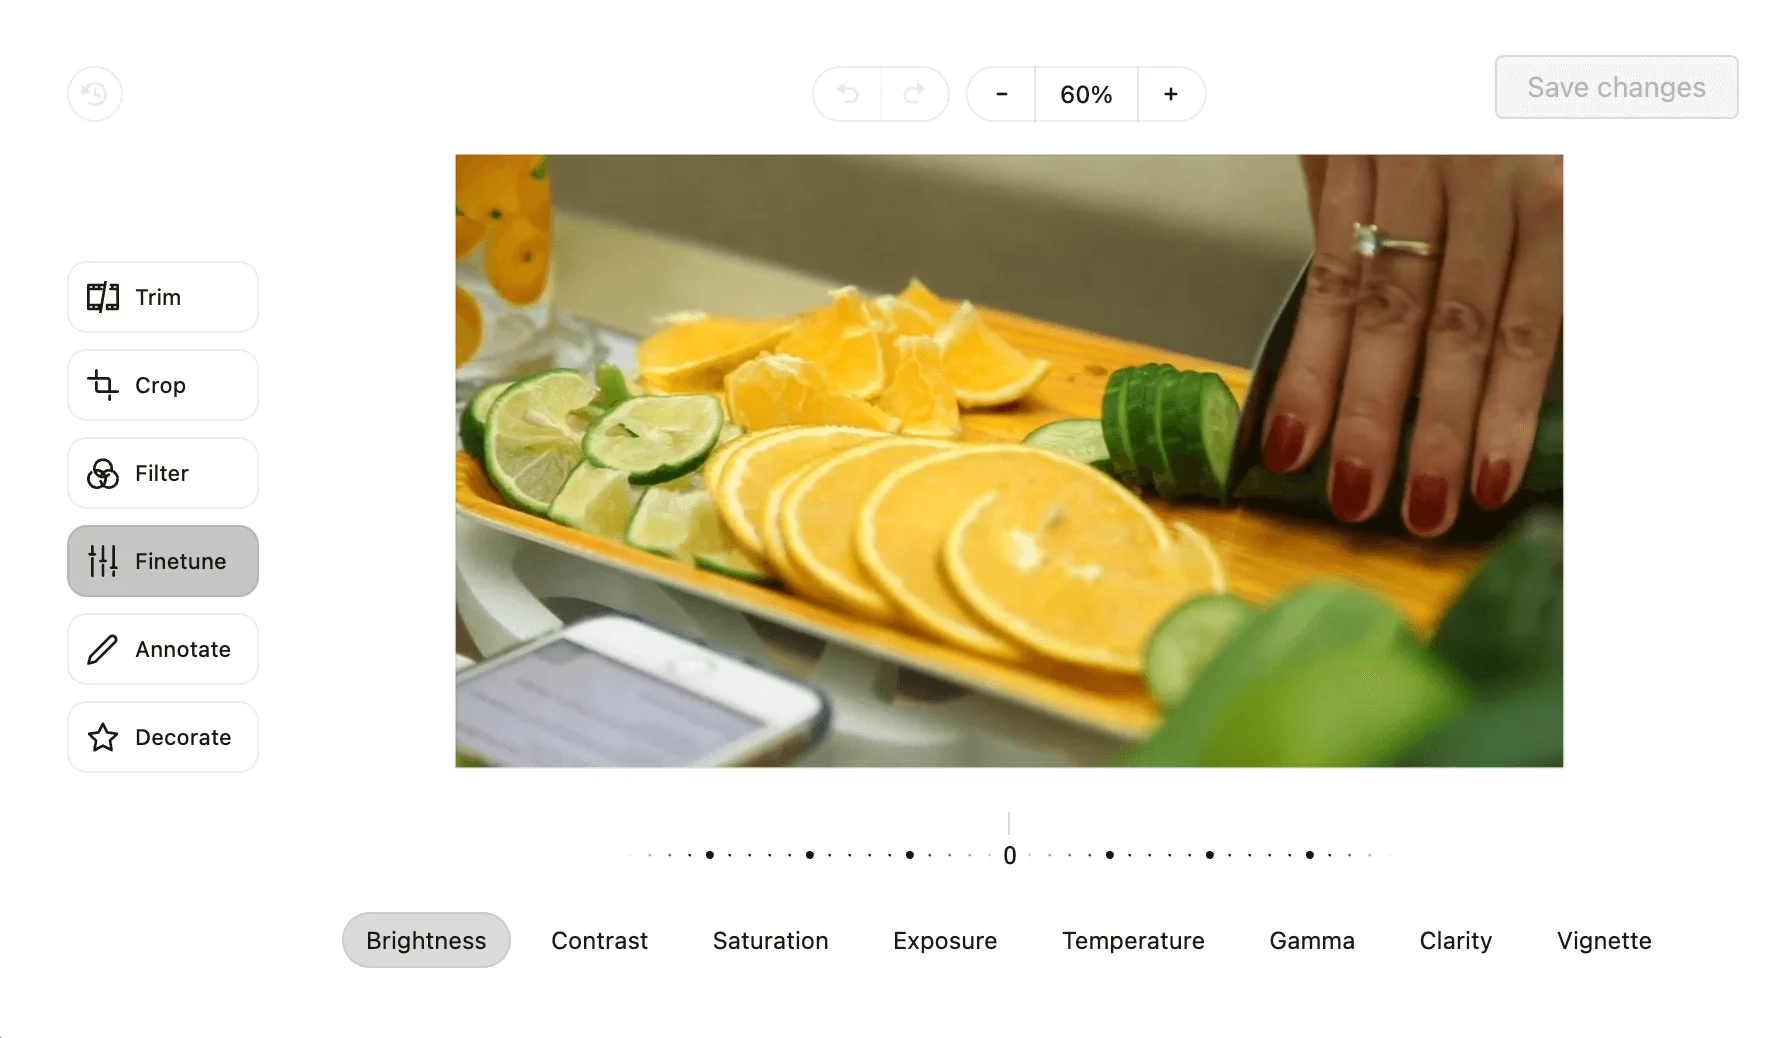 Video editing interface in Planable with tools like crop and filter, showing a person slicing citrus fruits on a cutting board.